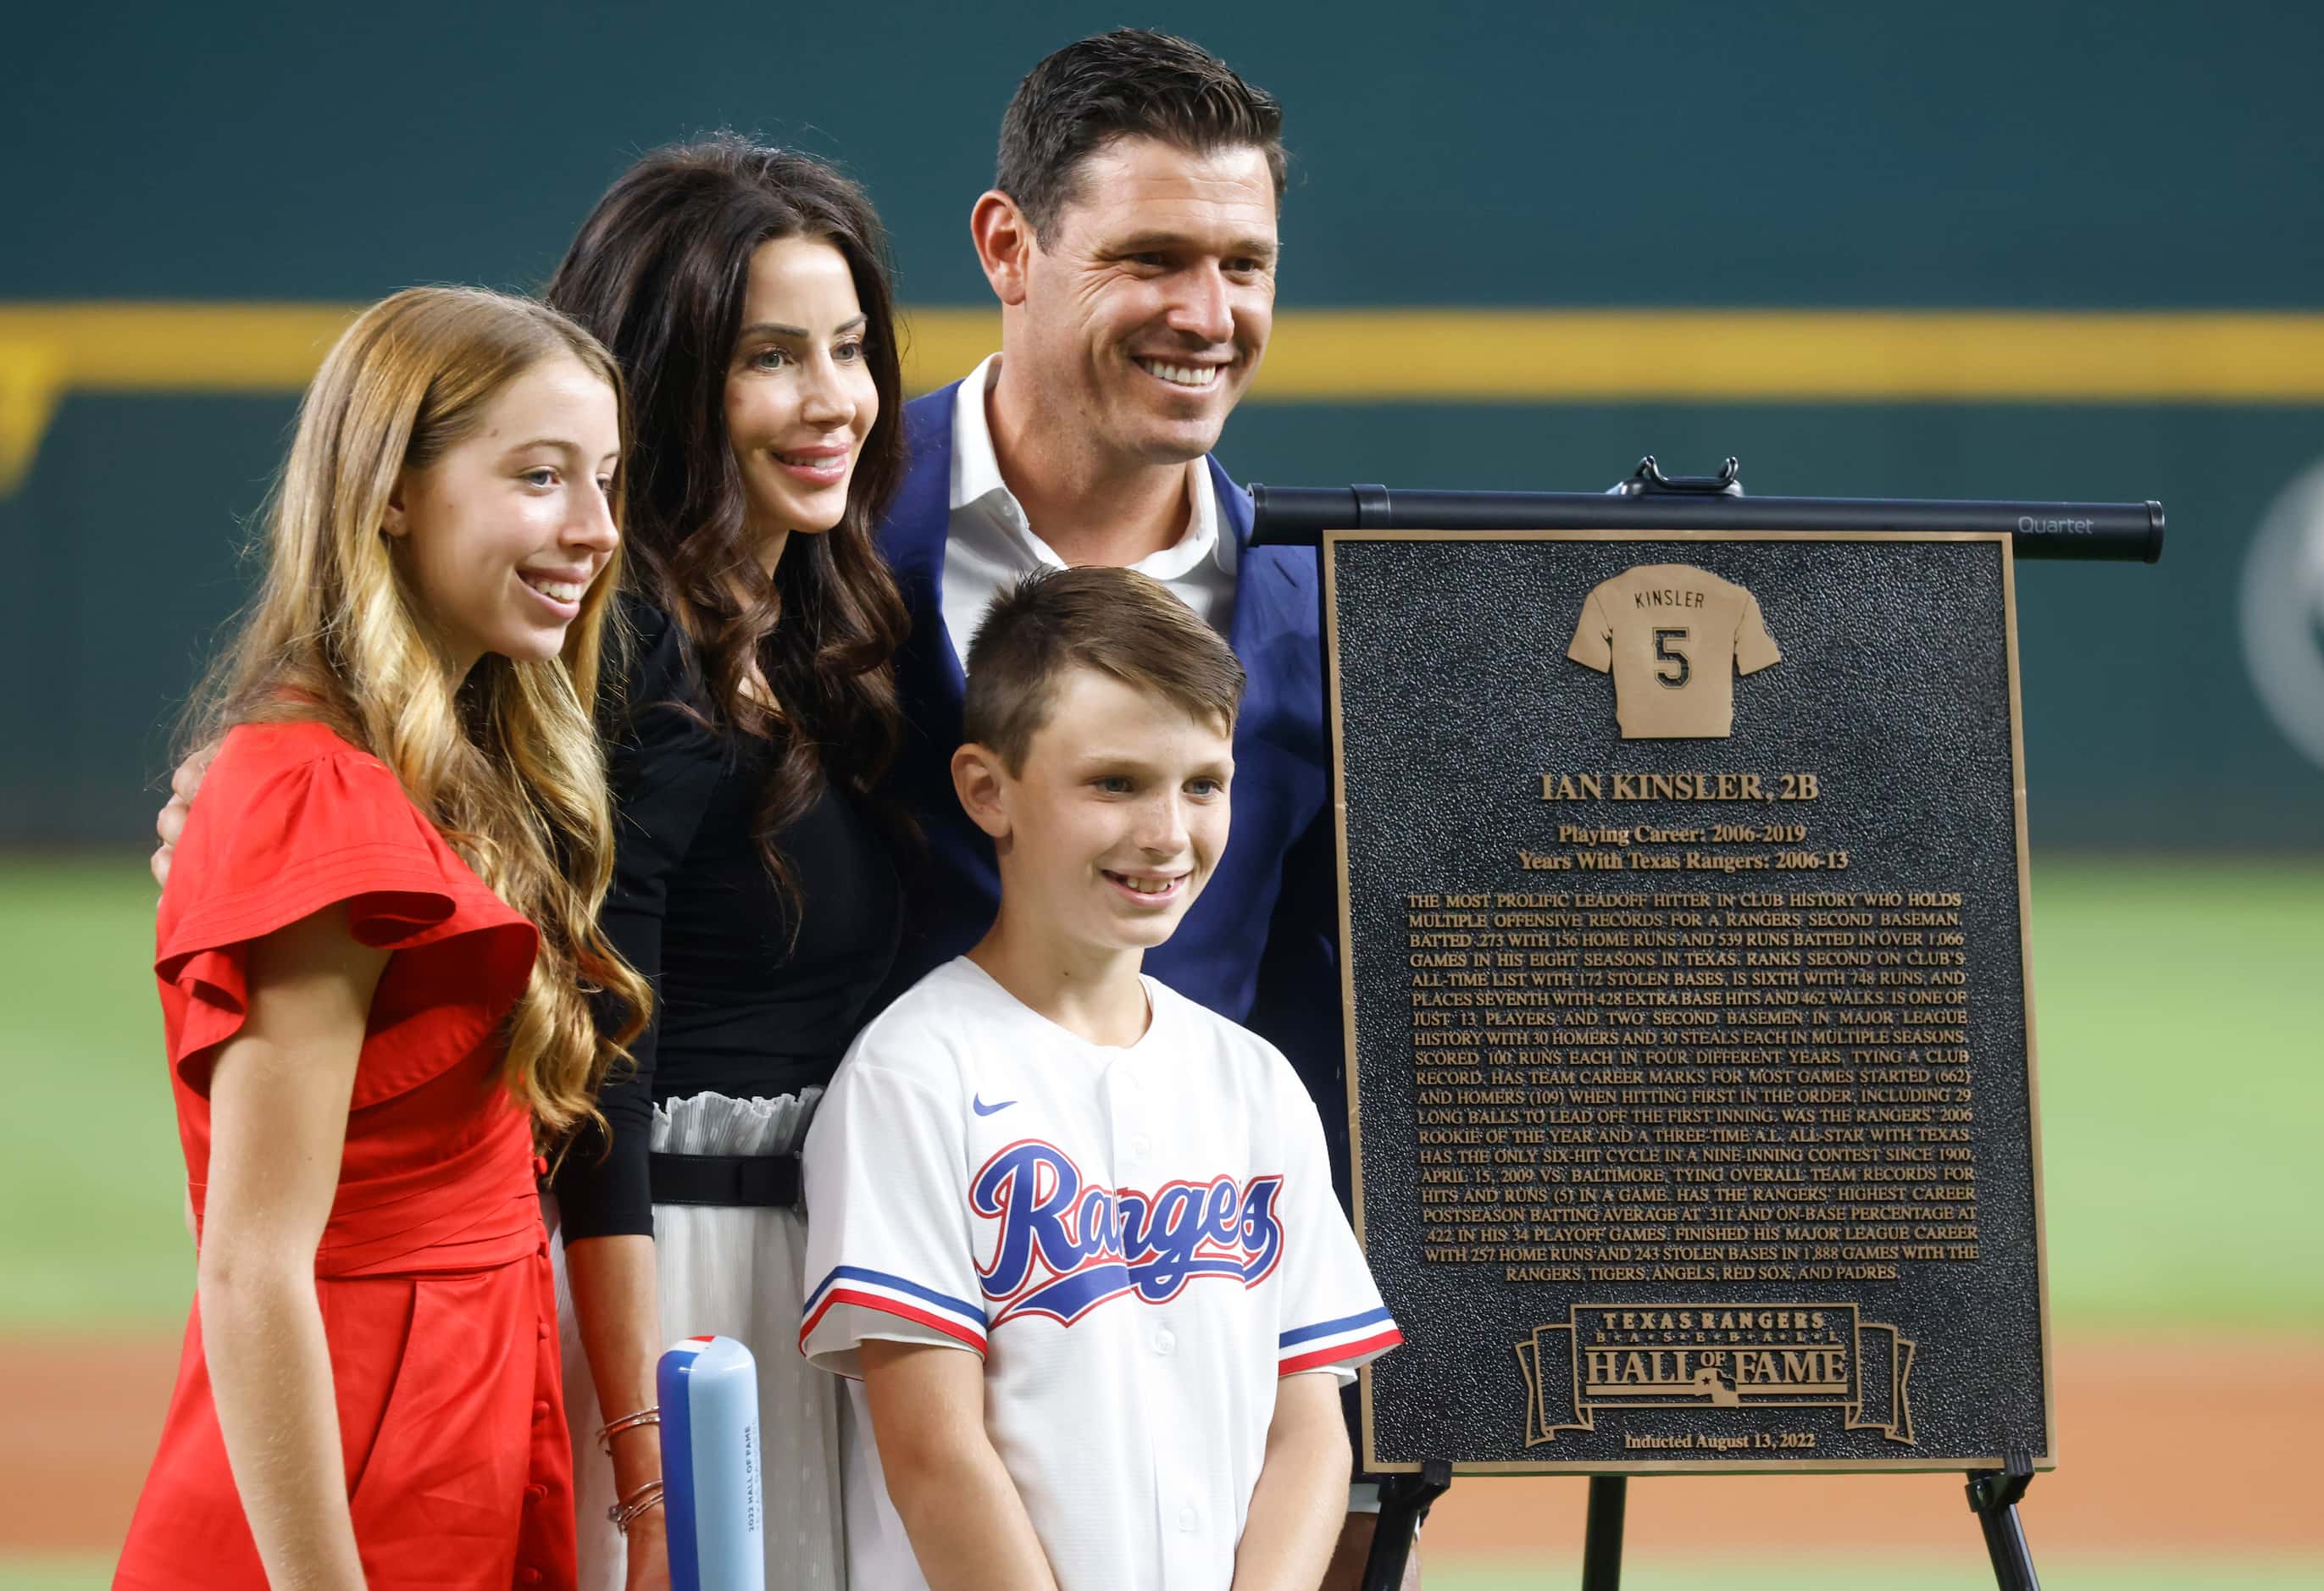 Former player Ian Kinsler took part in the Rangers Baseball Hall of Fame induction ceremony...